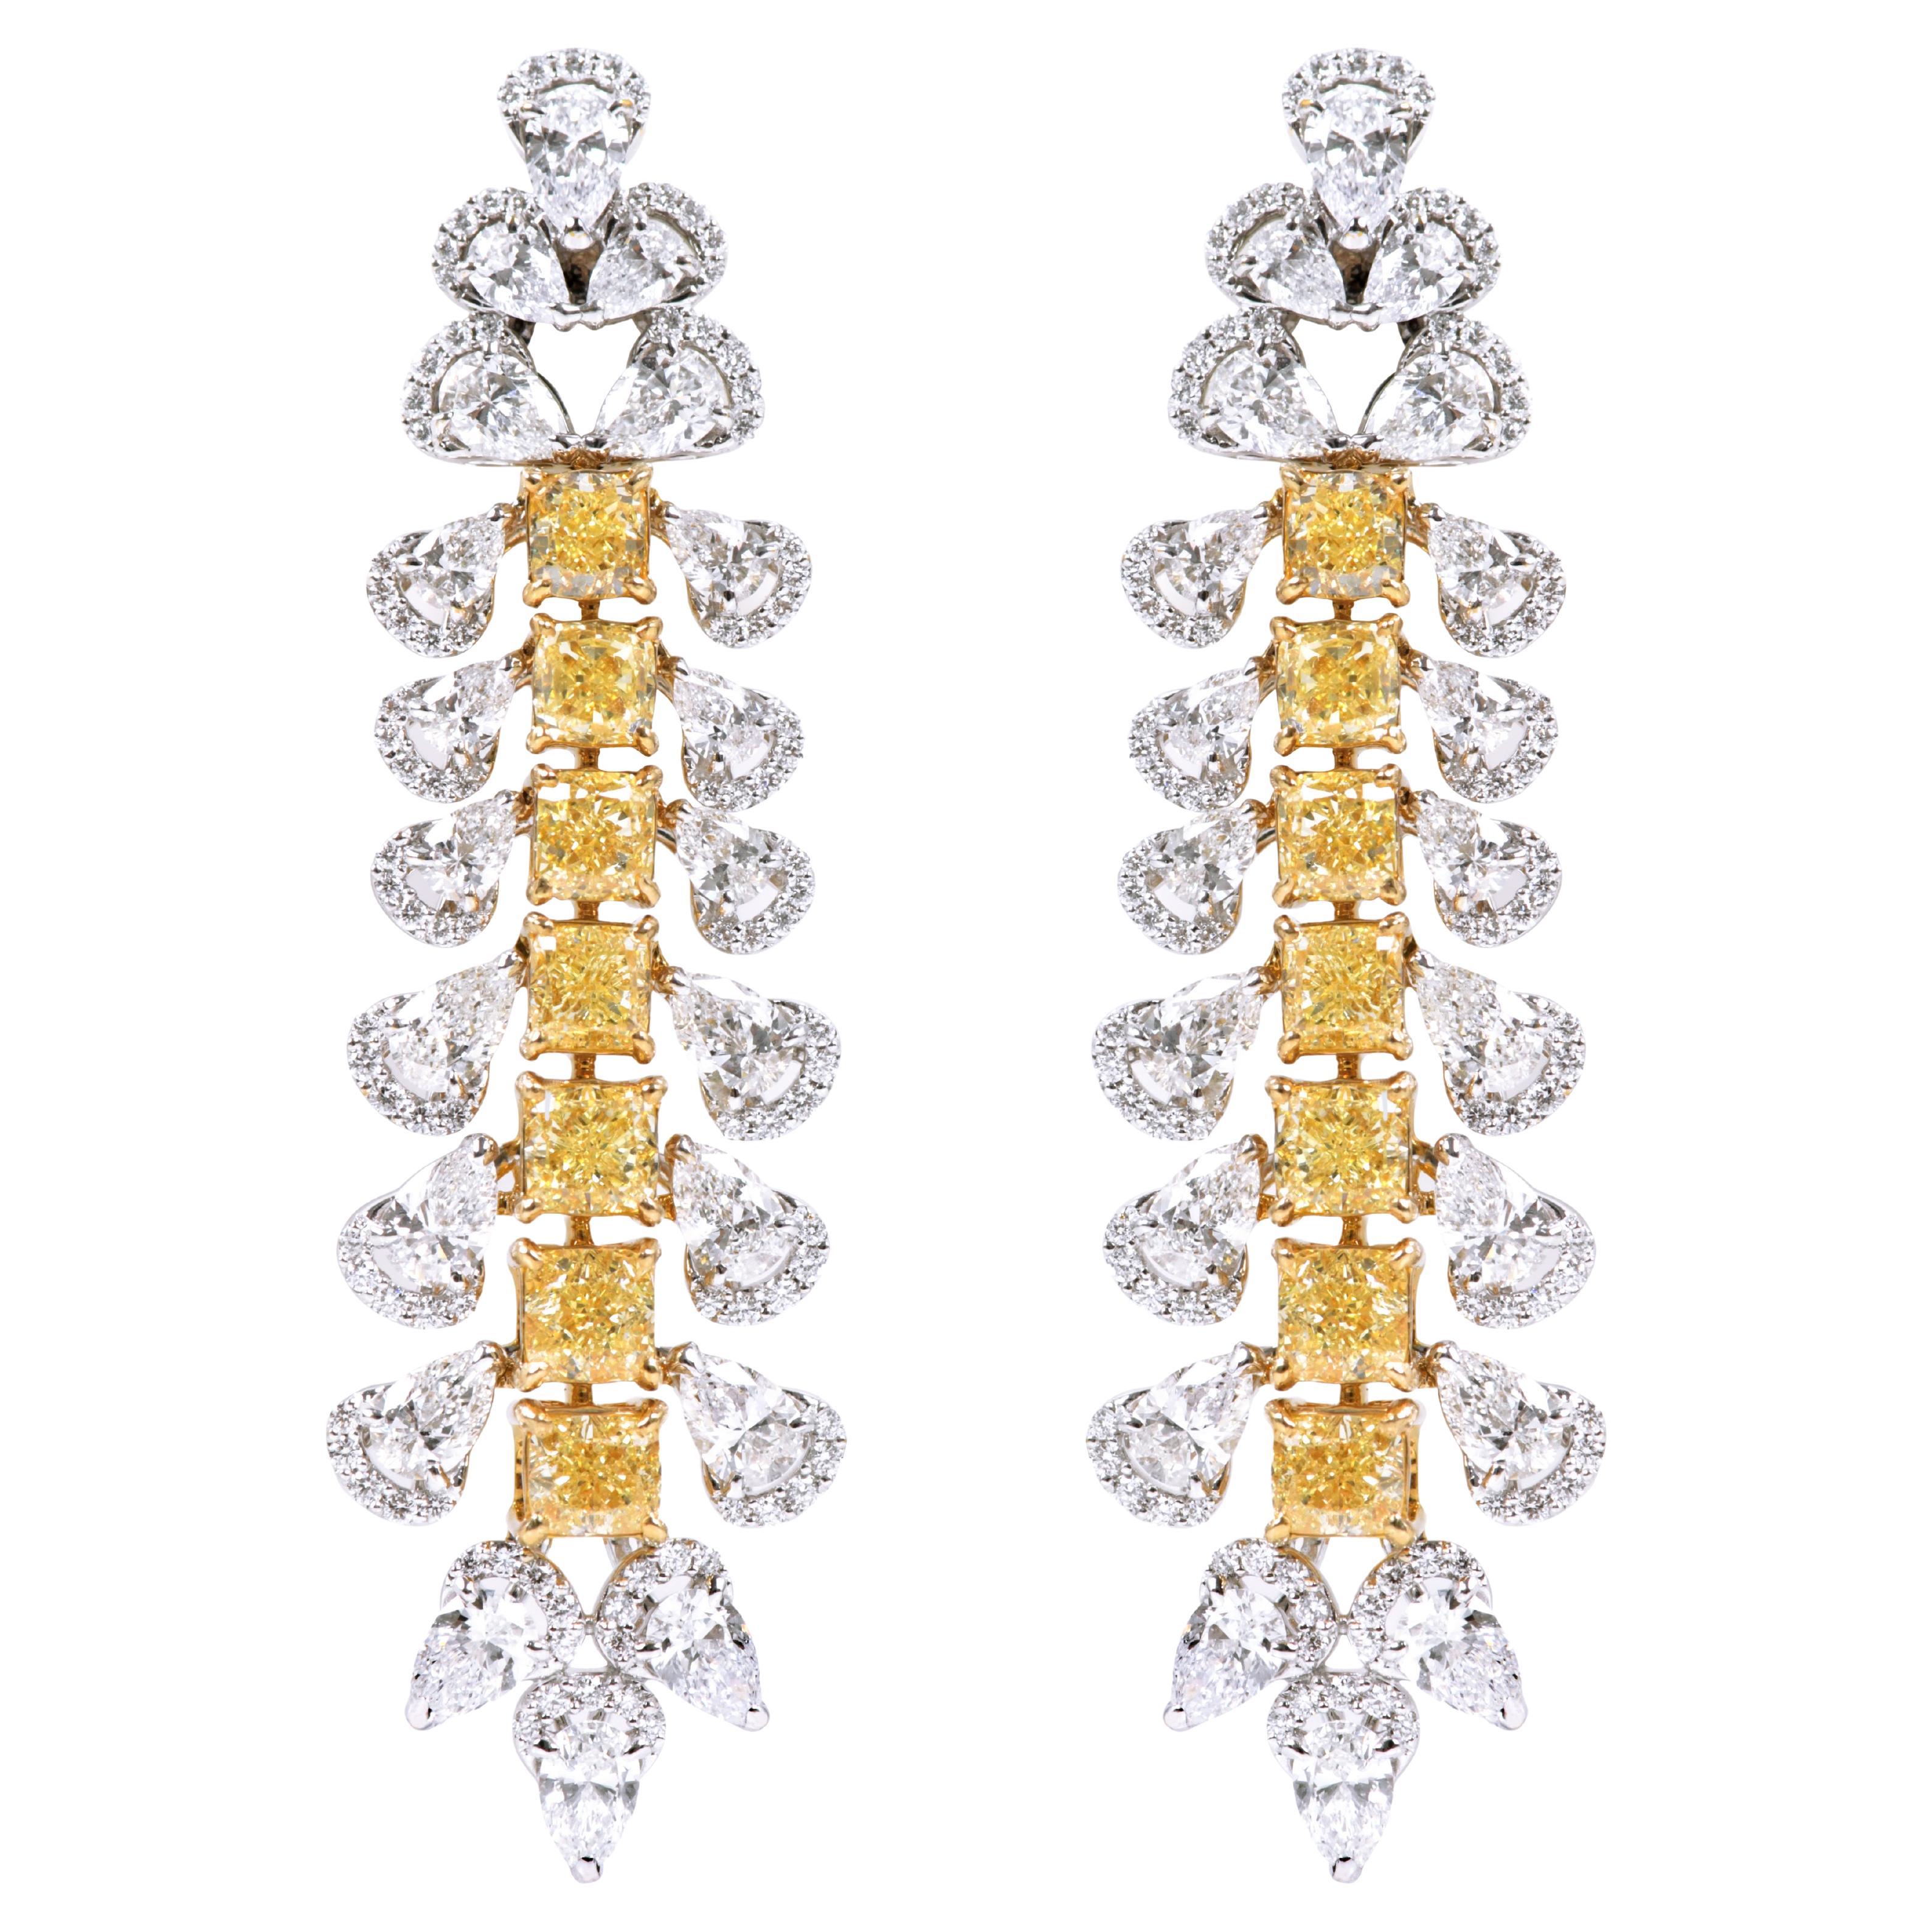 18 Karat Gold 13.31 Carat Yellow and White Diamond Solitaires Cocktail Earrings